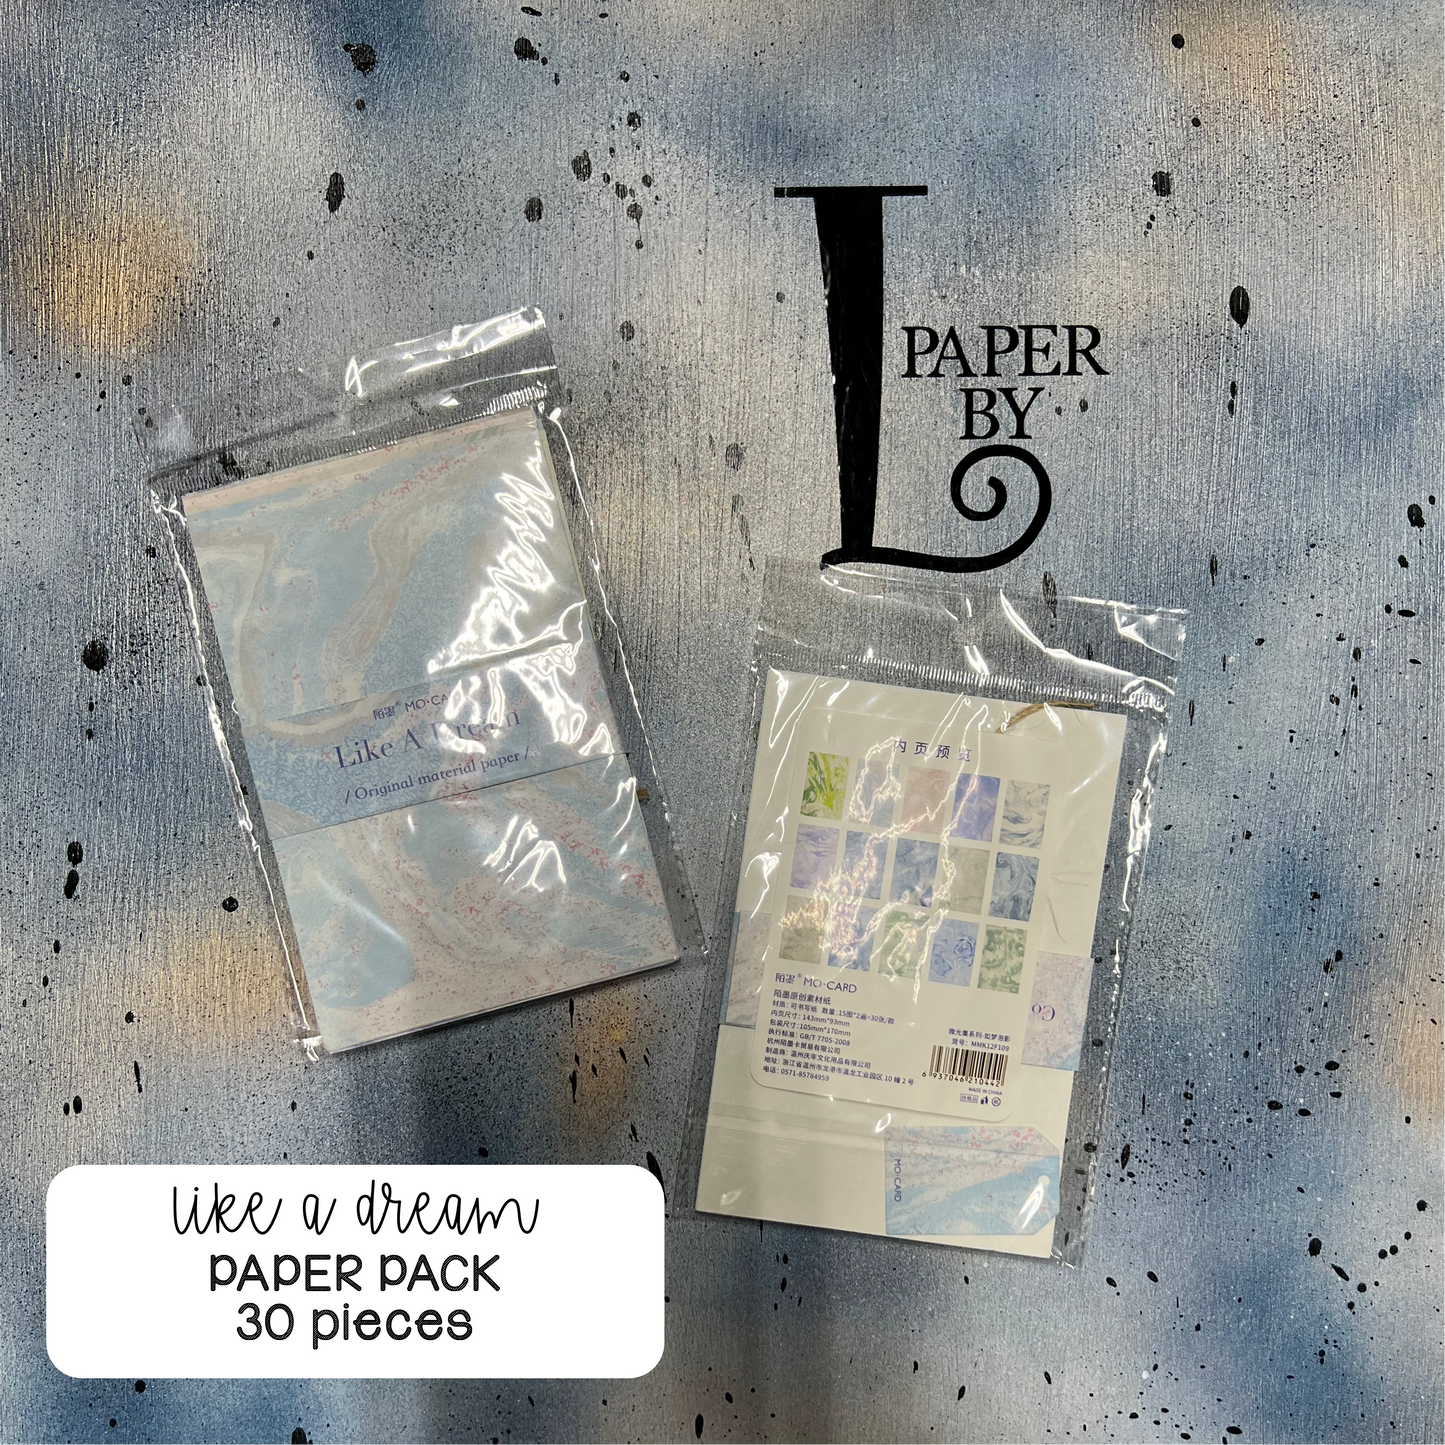 Paper Pack - Paper by L